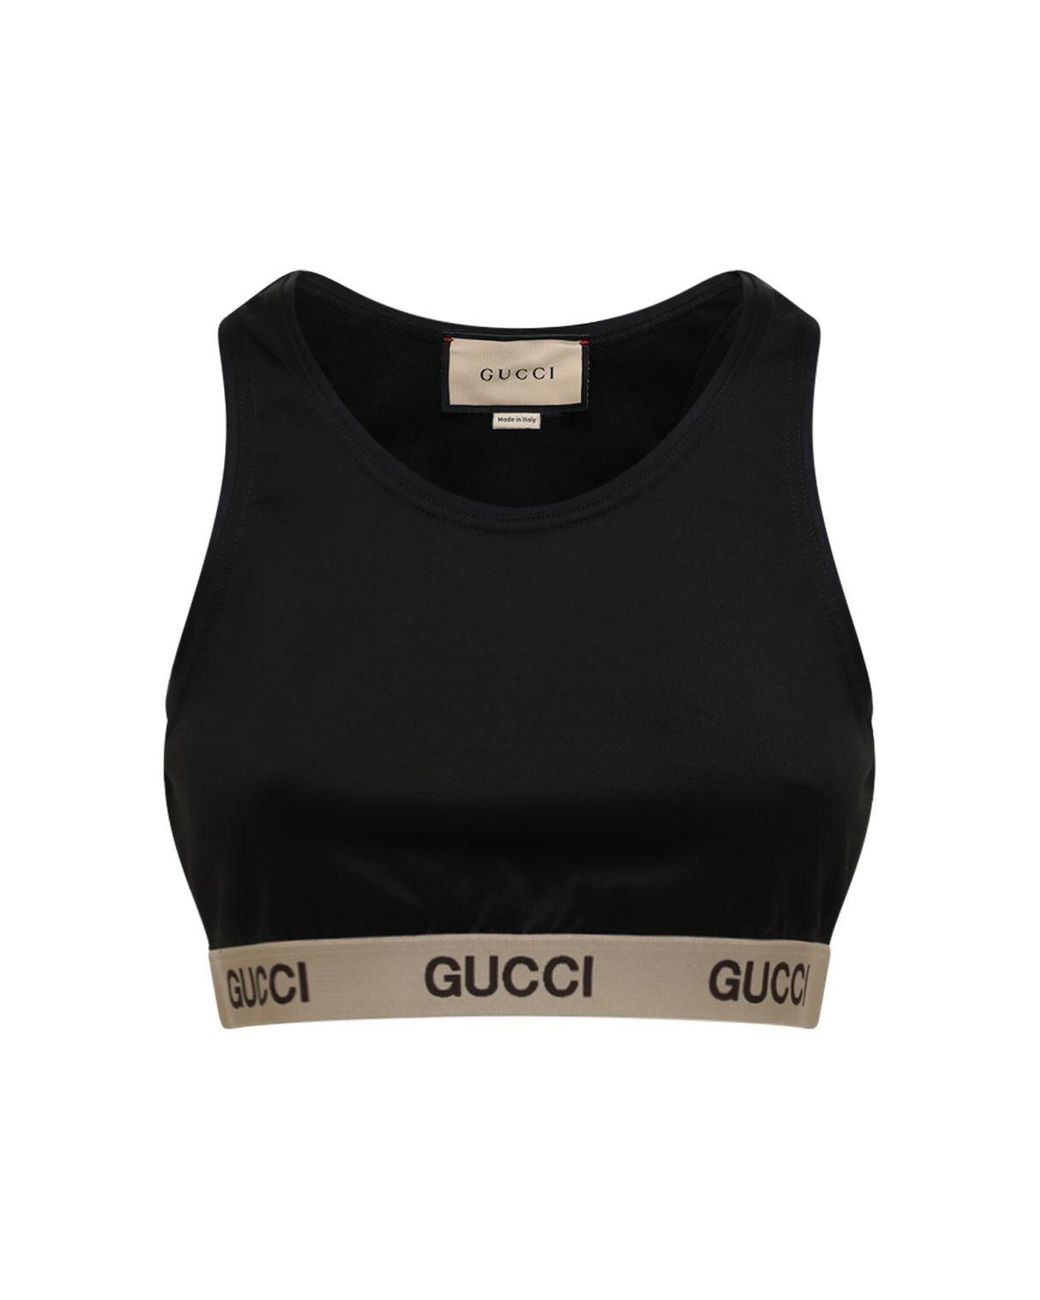 Gucci Black The North Face Edition Cropped Sports Top